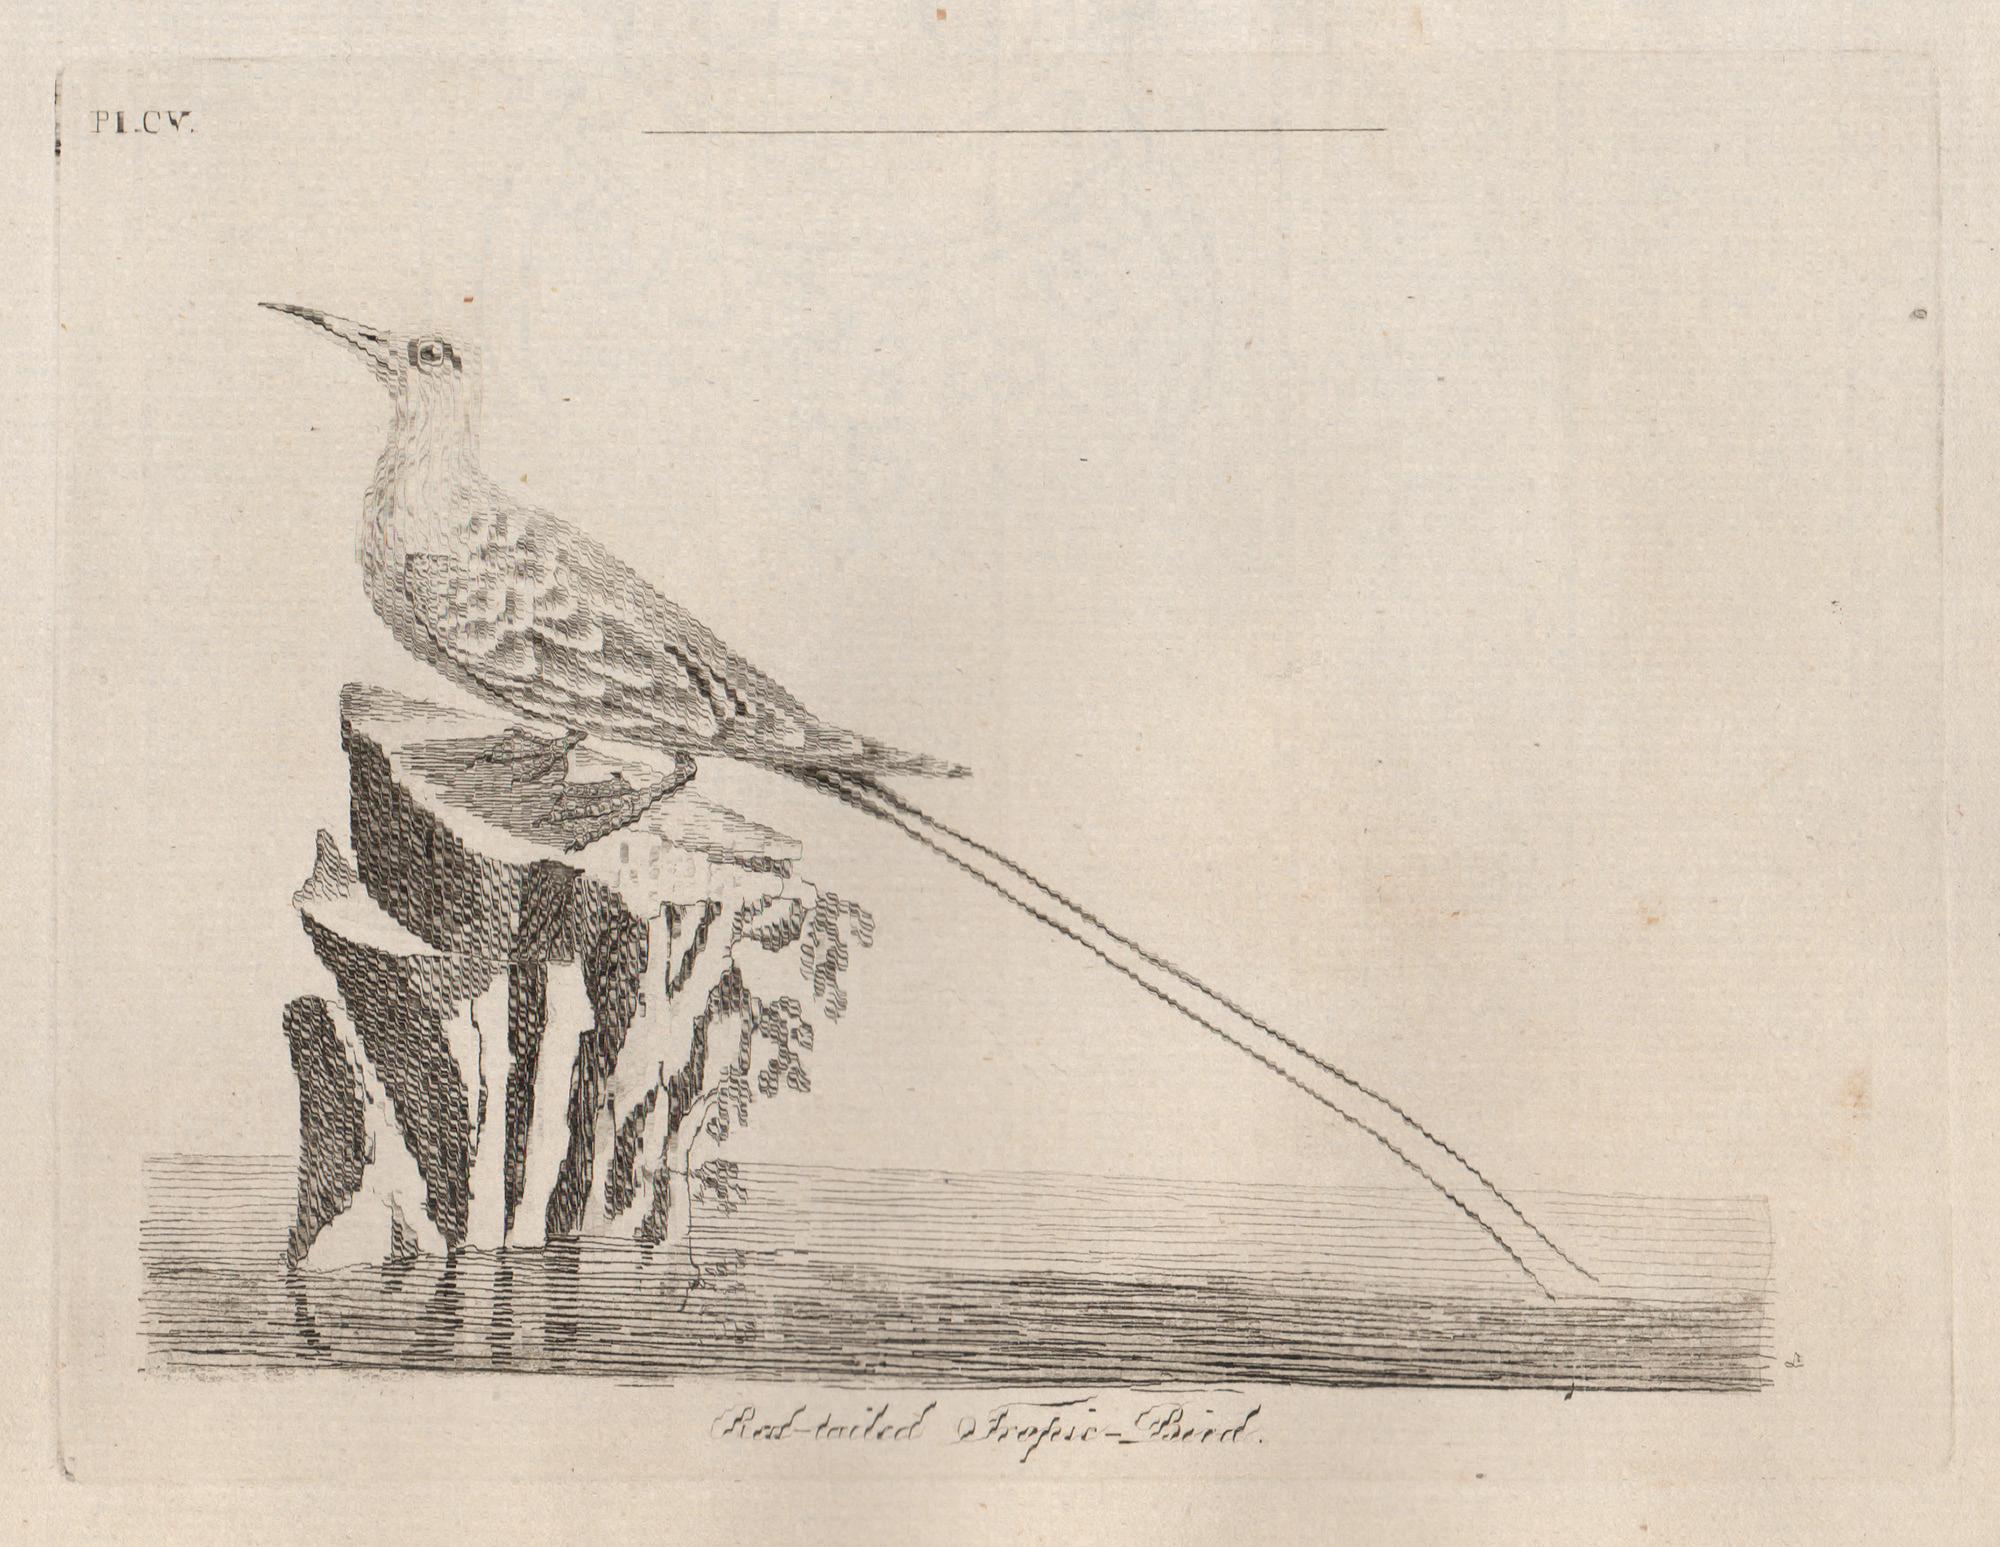 Copper-line engraving. 1781. From John Latham's 'General Synopsis of Birds' 1781-1785, and its Supplements. Plate number top left. Laid paper.

John Latham was the leading English ornithologist of his day.

135mm by 180mm (platemark) 
180mm by 240mm